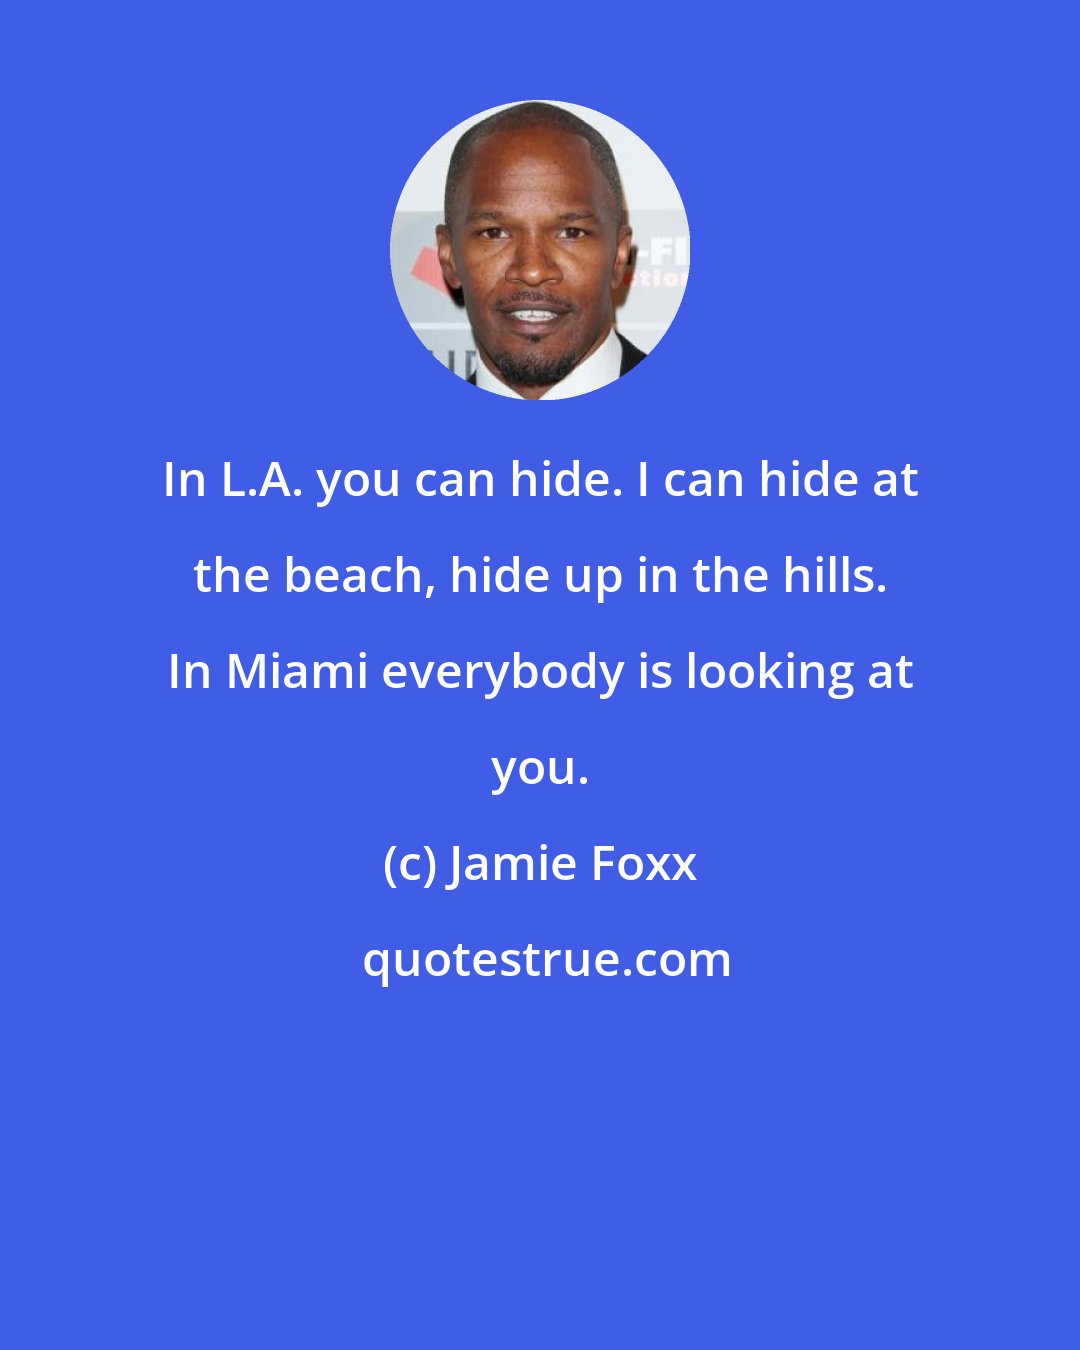 Jamie Foxx: In L.A. you can hide. I can hide at the beach, hide up in the hills. In Miami everybody is looking at you.